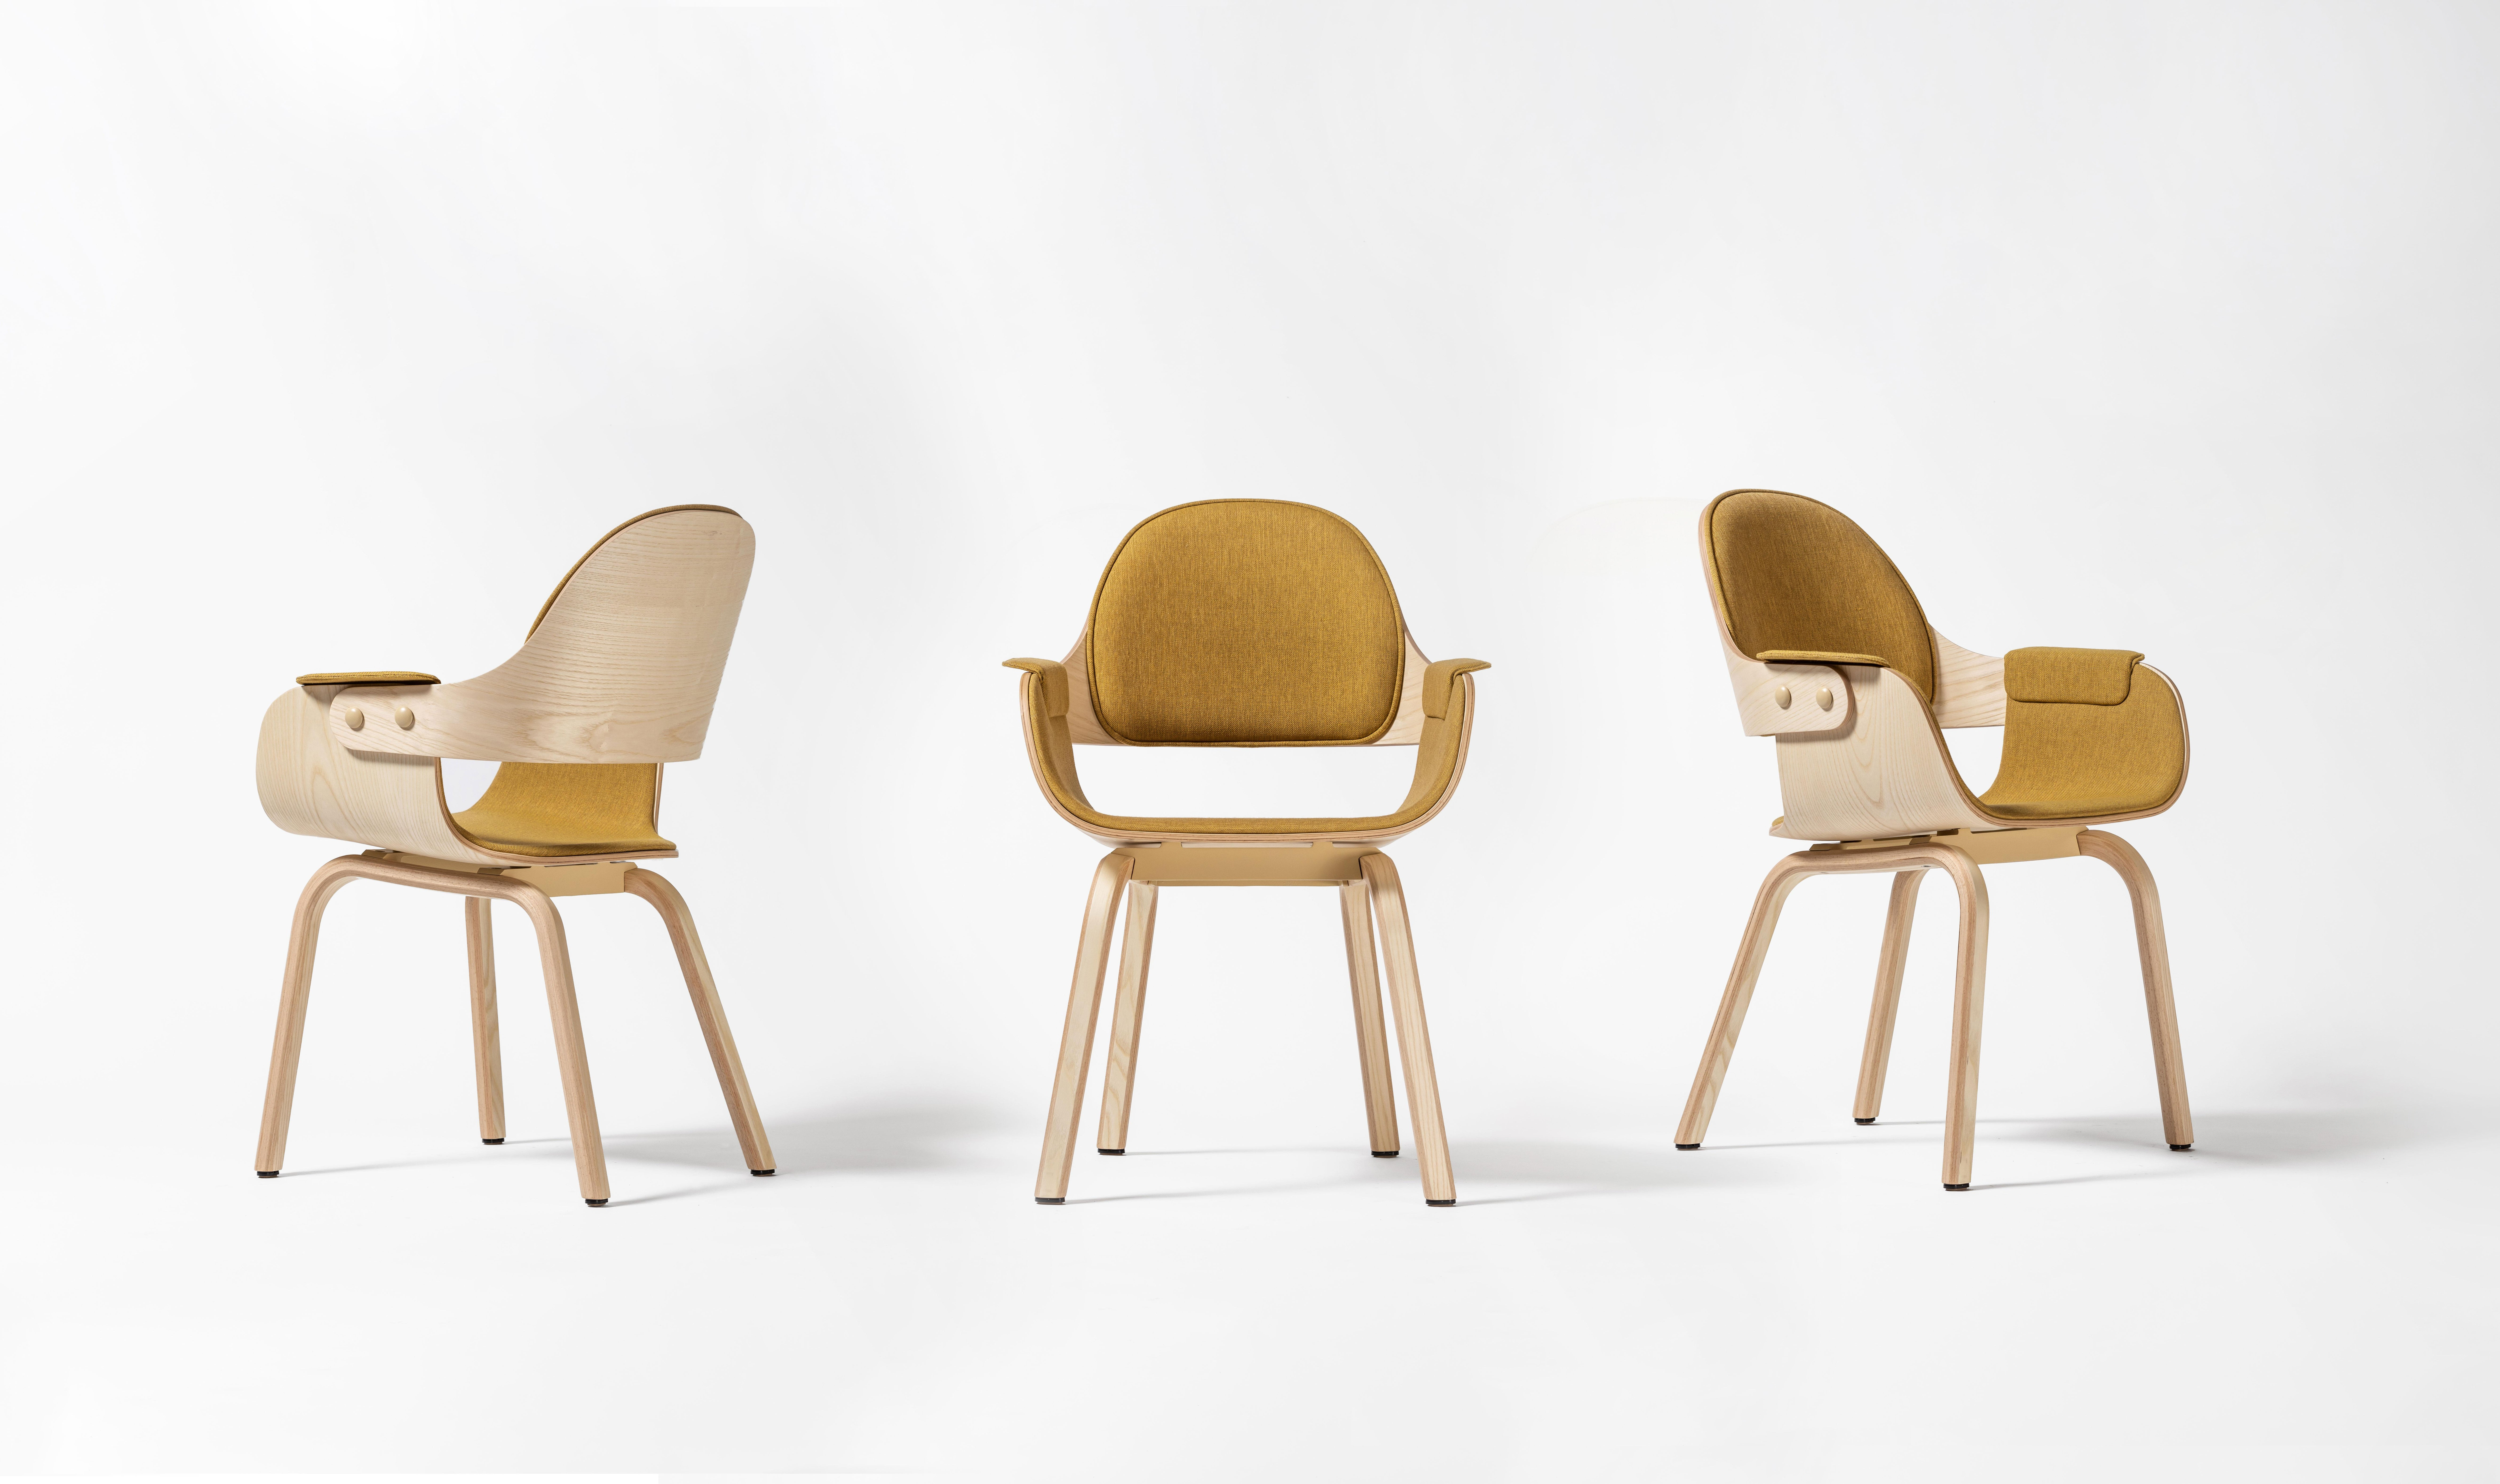 Set of 3 wooden legs showtime chair by Jaime Hayon 
Dimensions: D 55 x W 55 x H 86 cm 
Materials: powder coated steel or aluminium structure. Legs, seat and backrest in plywood with exteriors in natural ash, walnut or ash stained black. Metallic